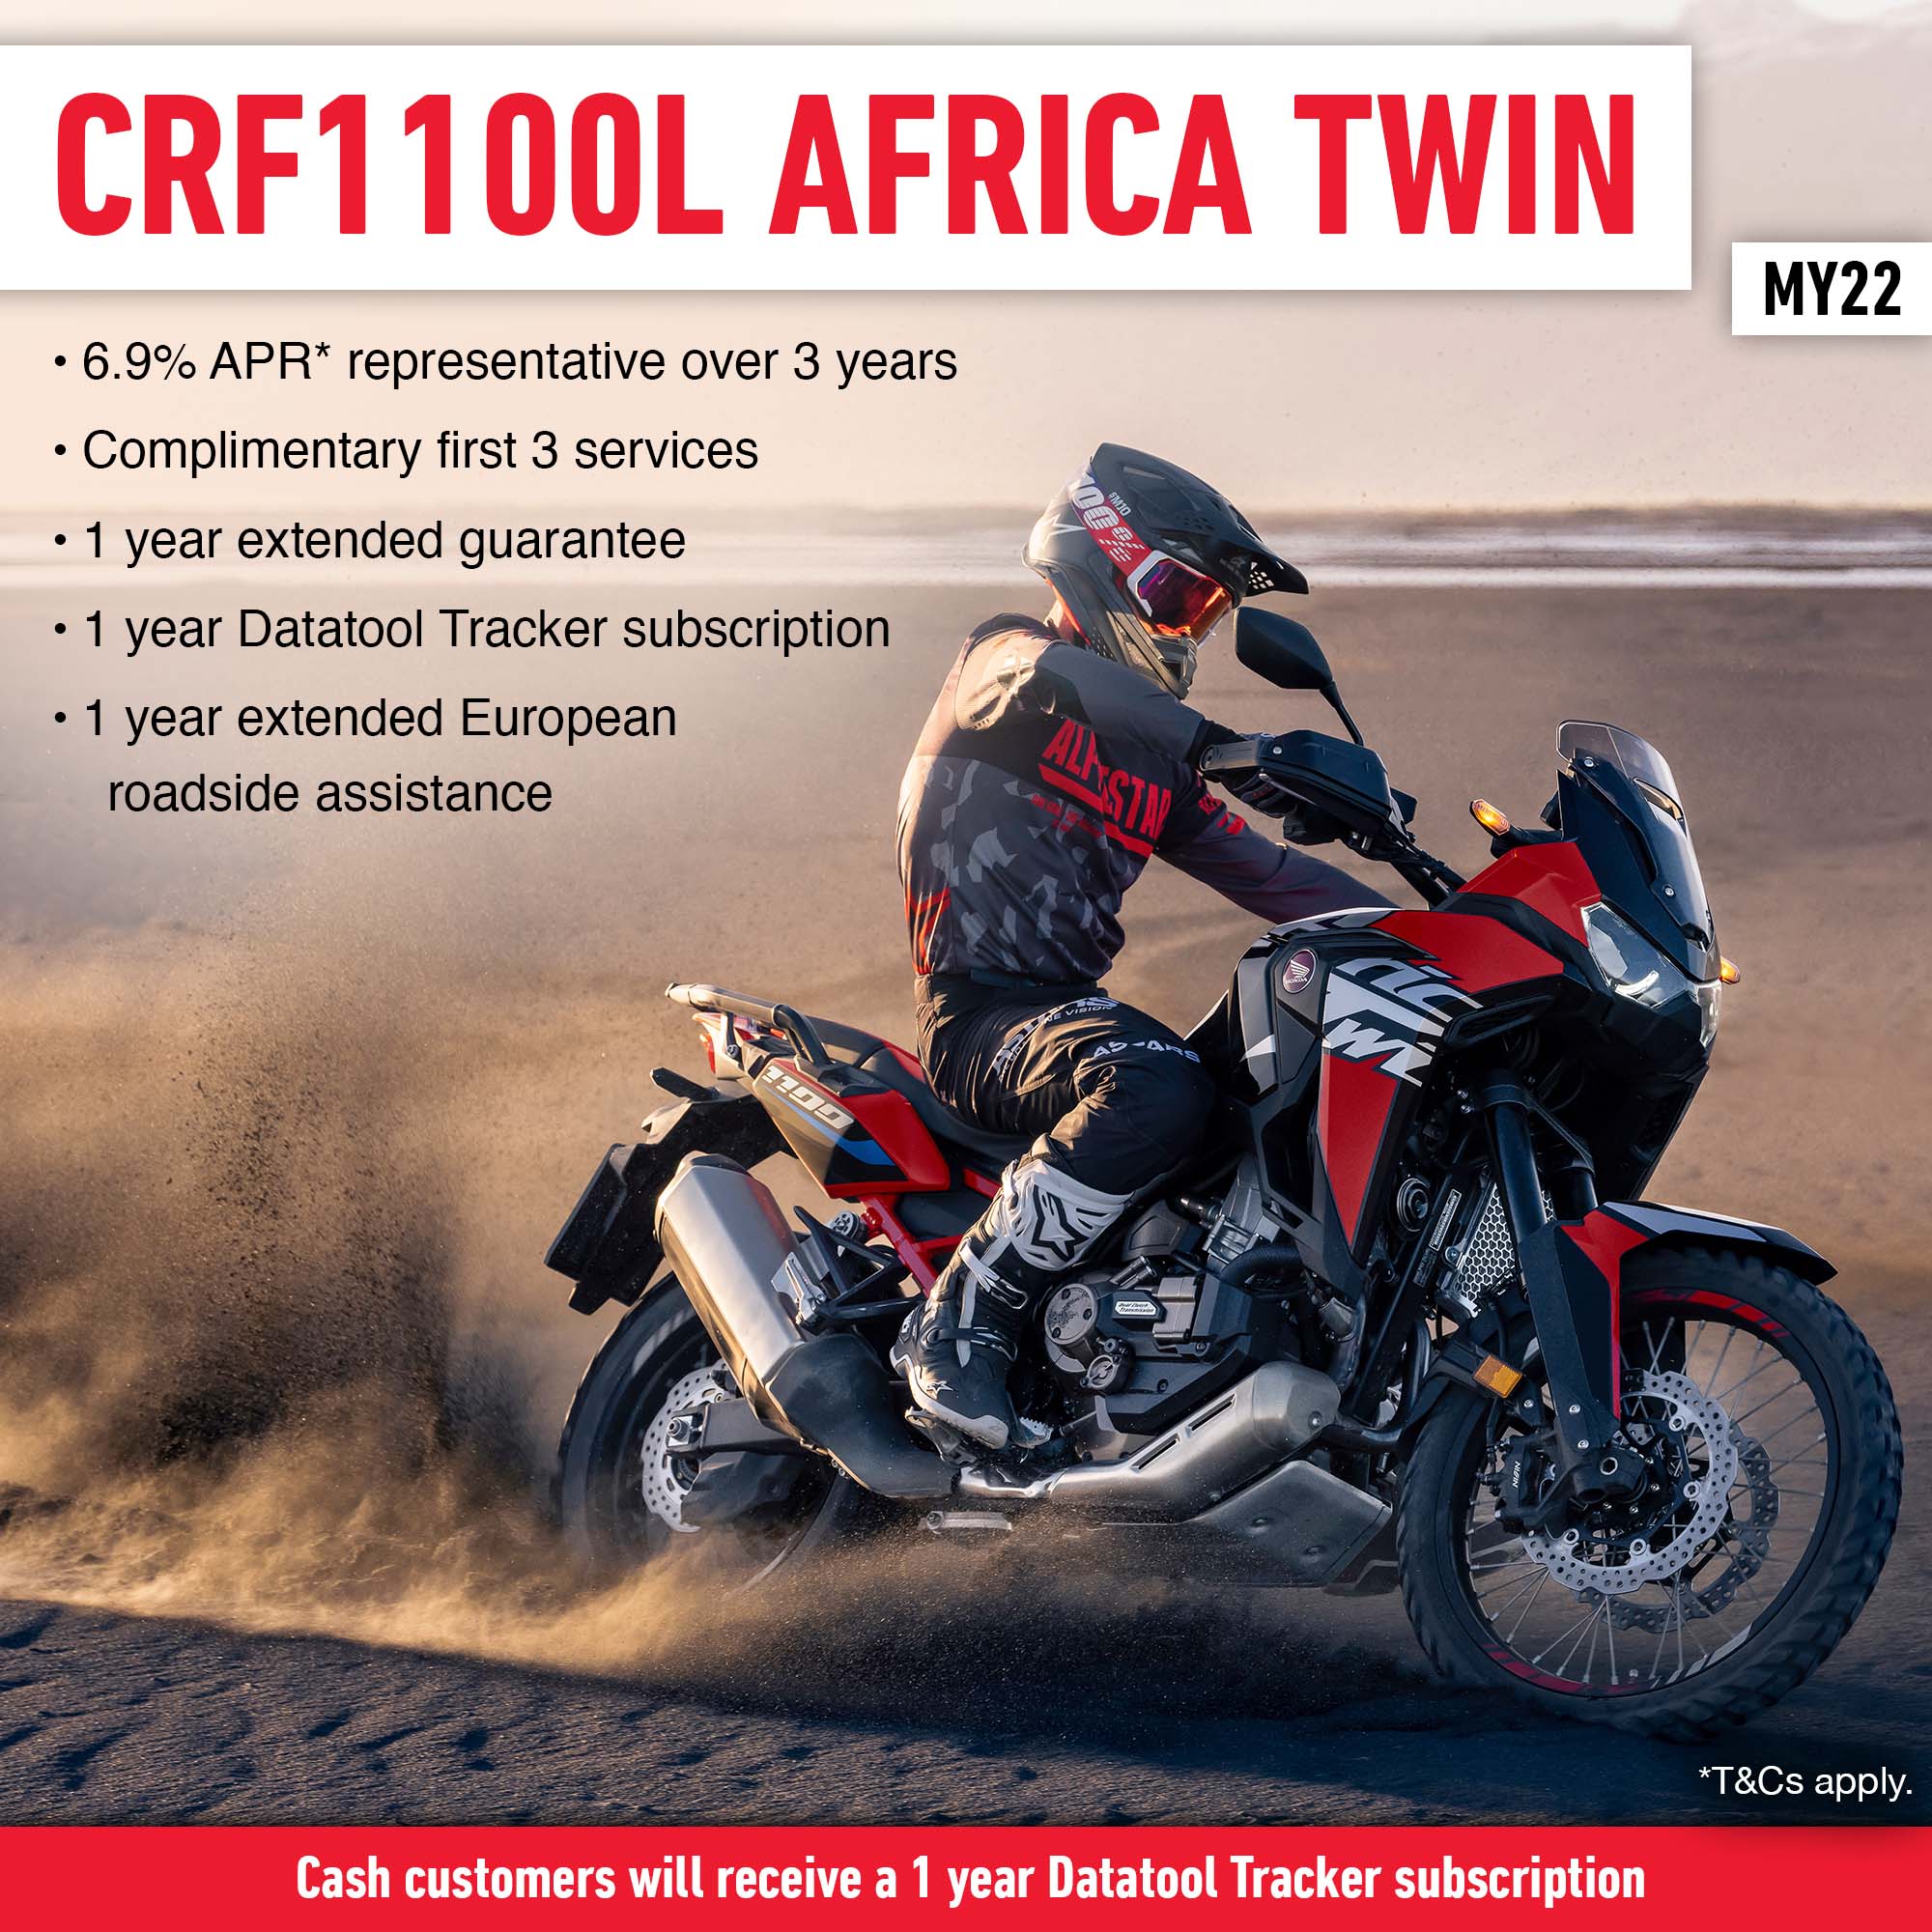 Brand new Honda finance offers on the MY22 Africa Twin